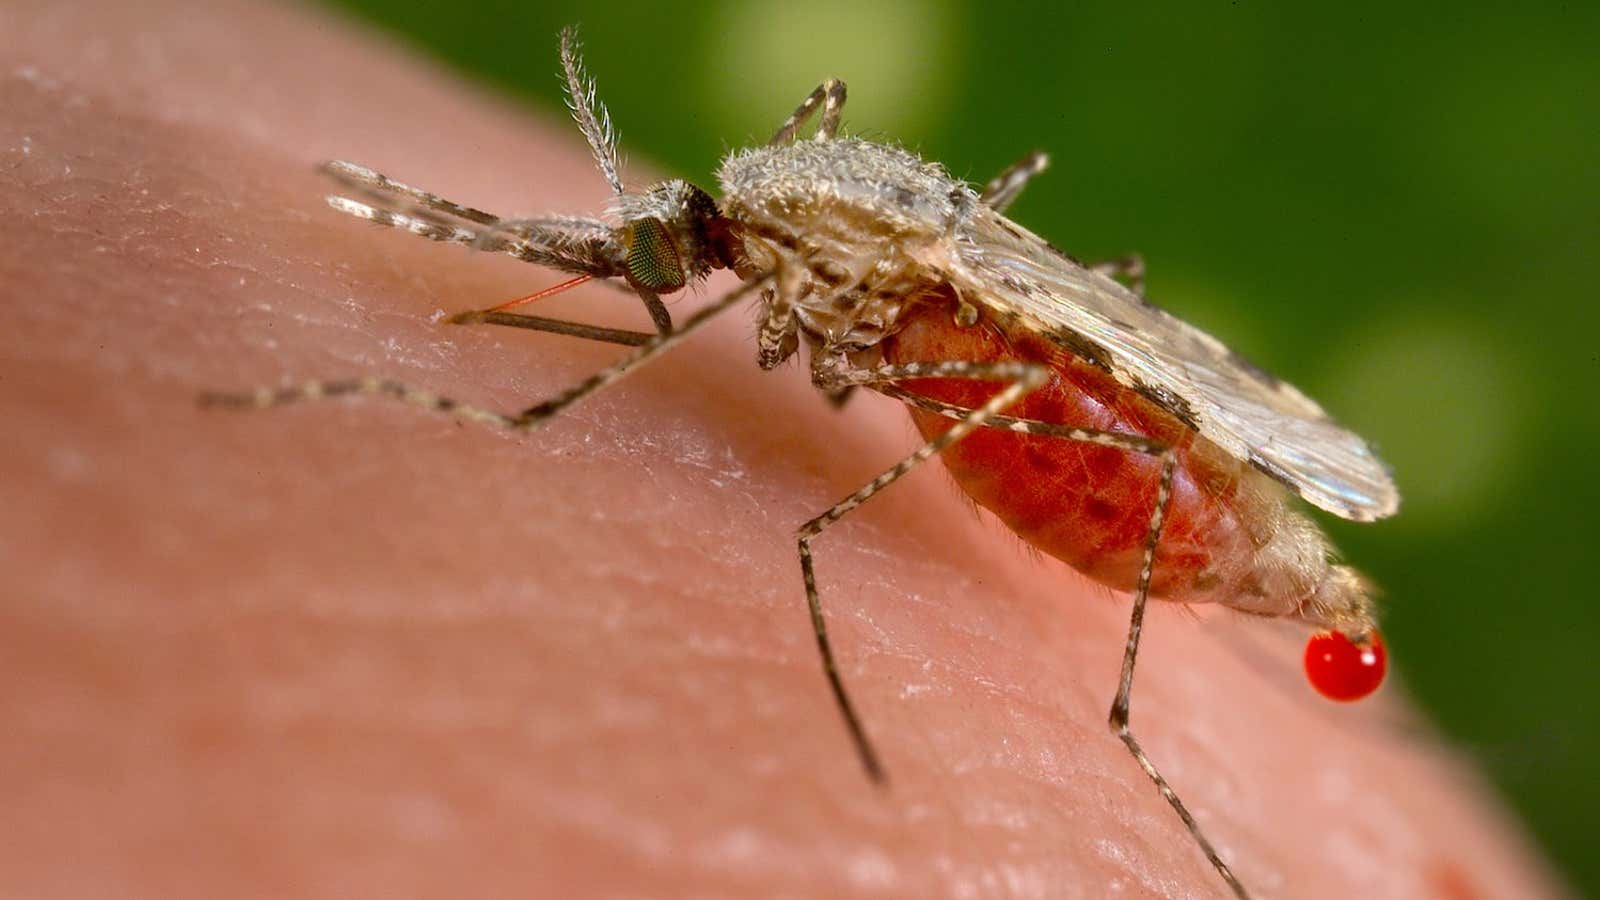 An Anopheles stephensi mosquito obtains a blood meal from a human host.